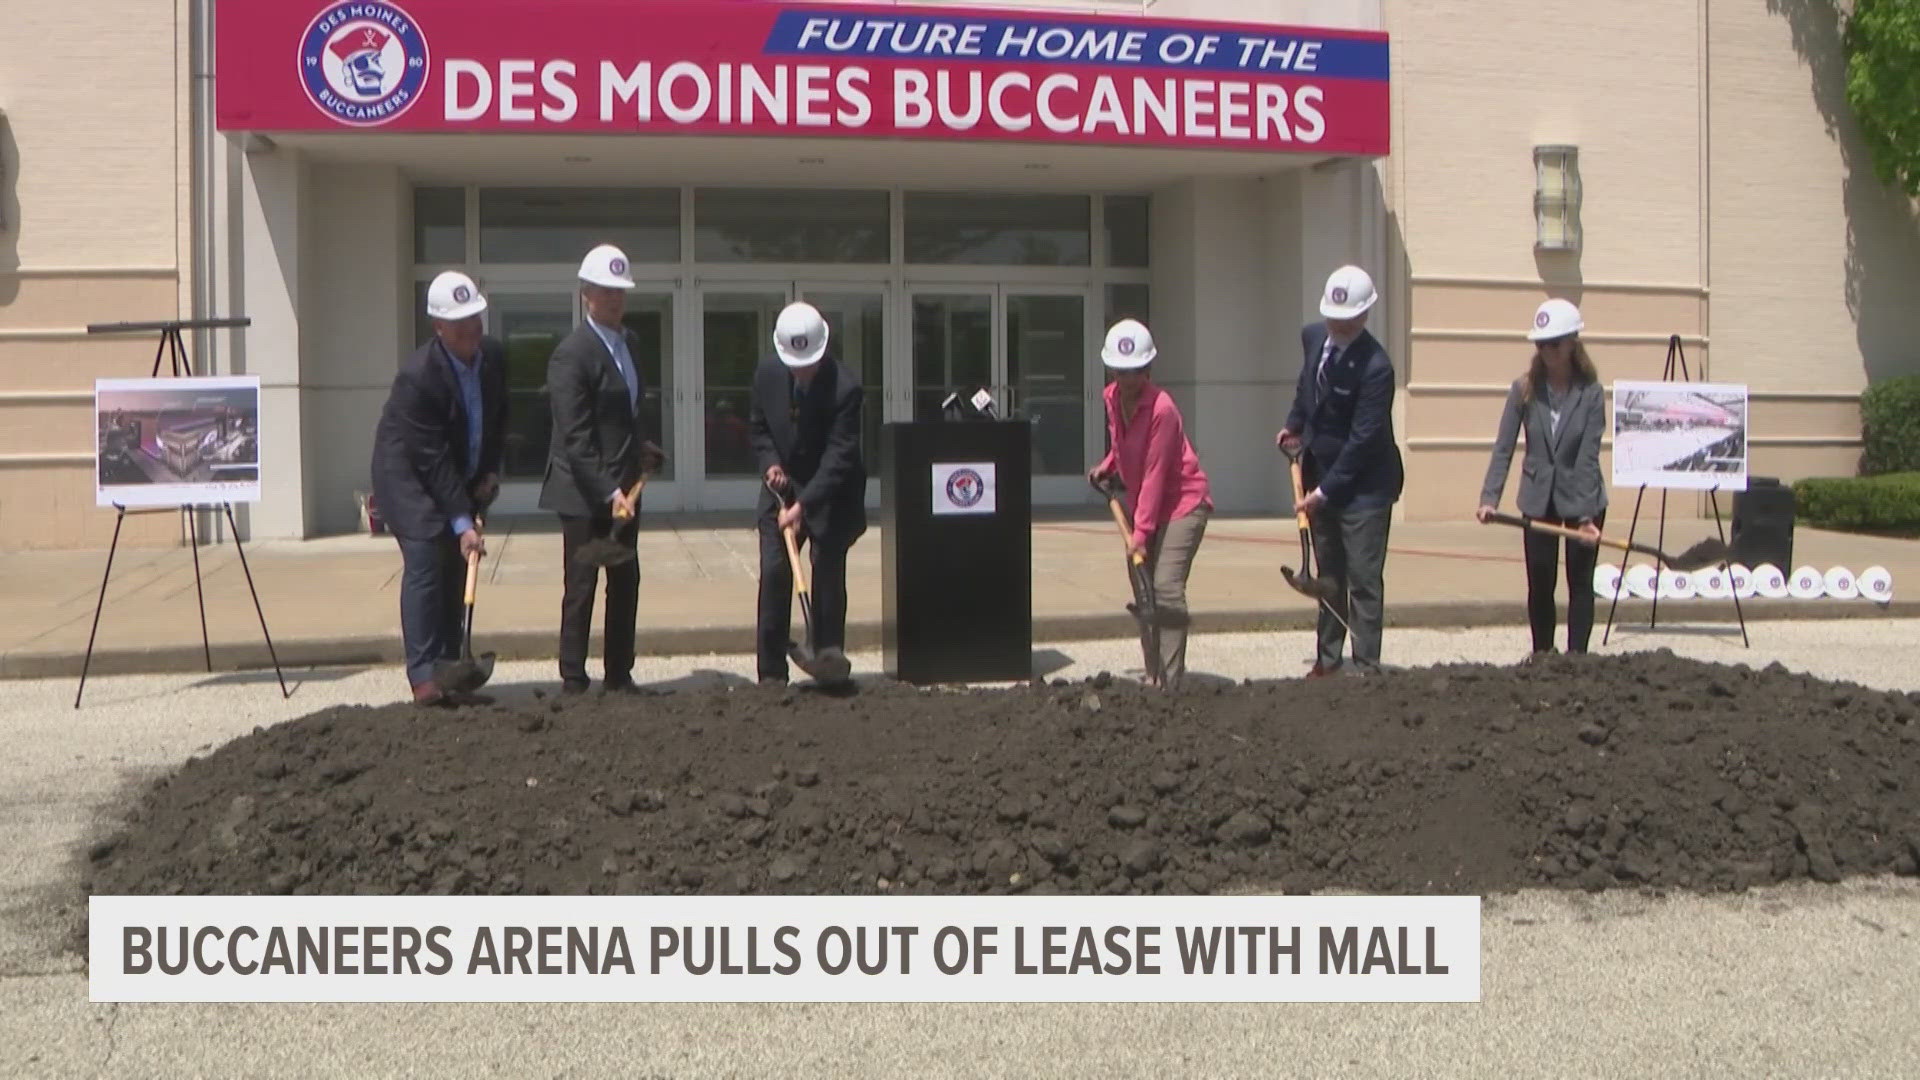 The new area was part of the mall's sports and entertainment initiative, with hopes of bringing foot traffic, the mall says it is still committed to that plan.